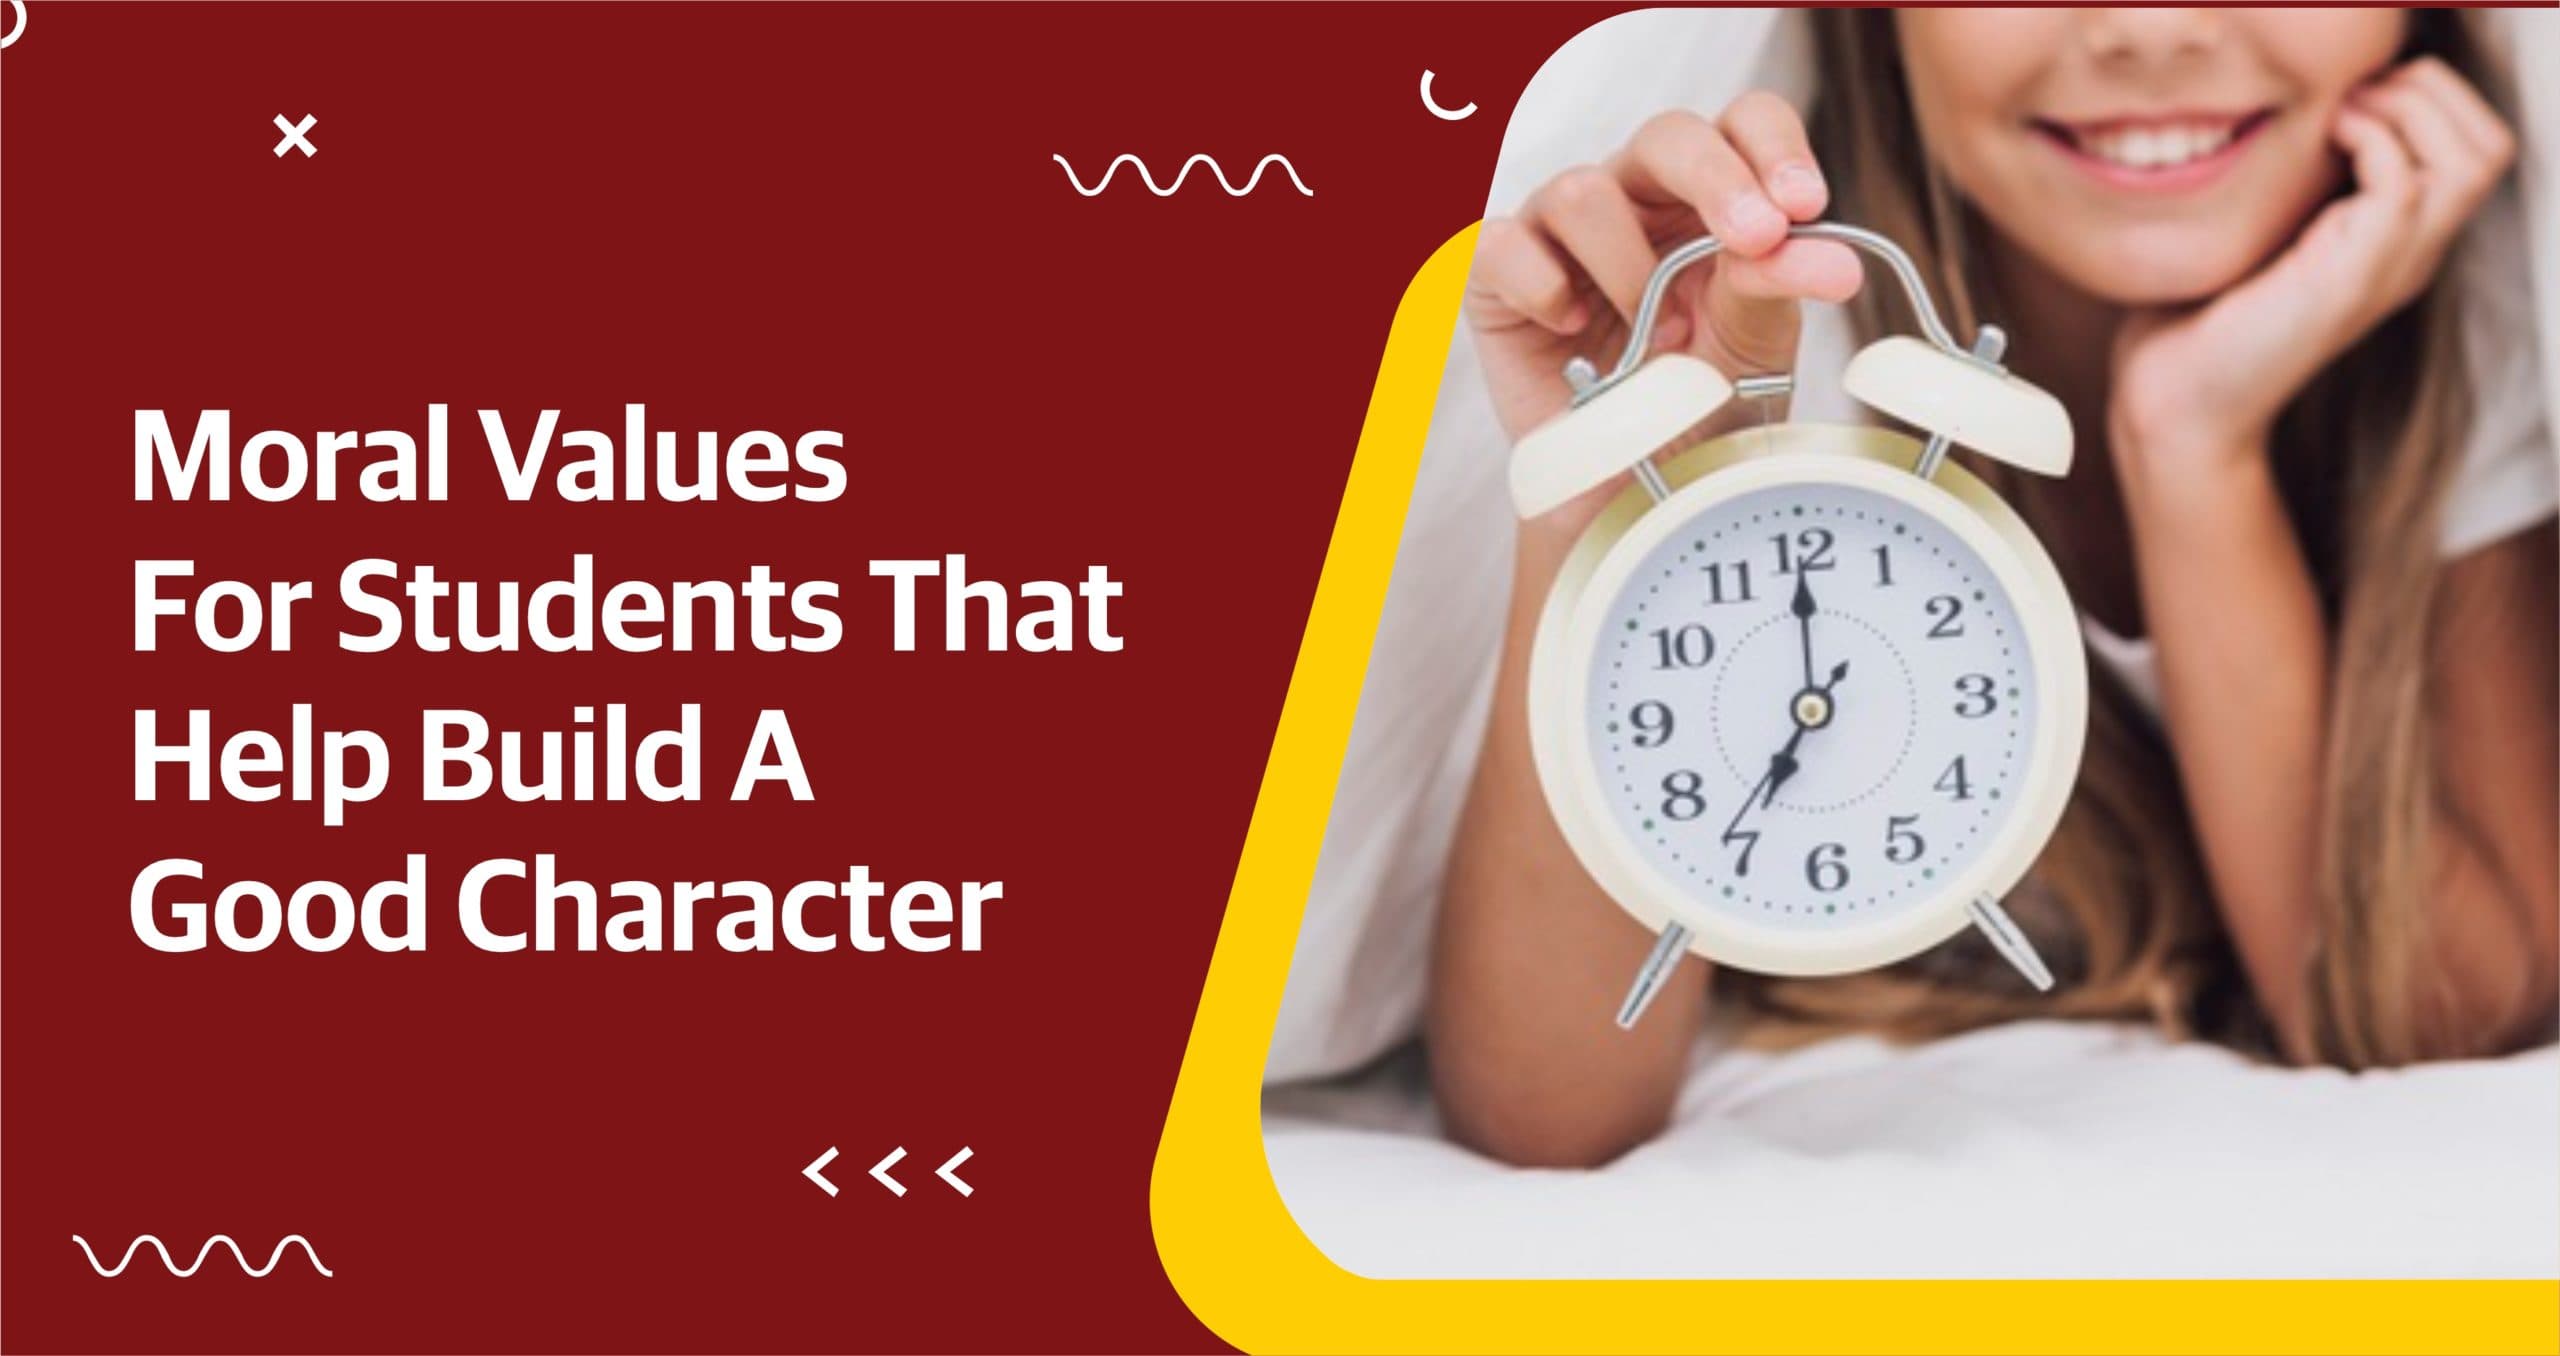 Moral Values for Students That Help Build a Good Character